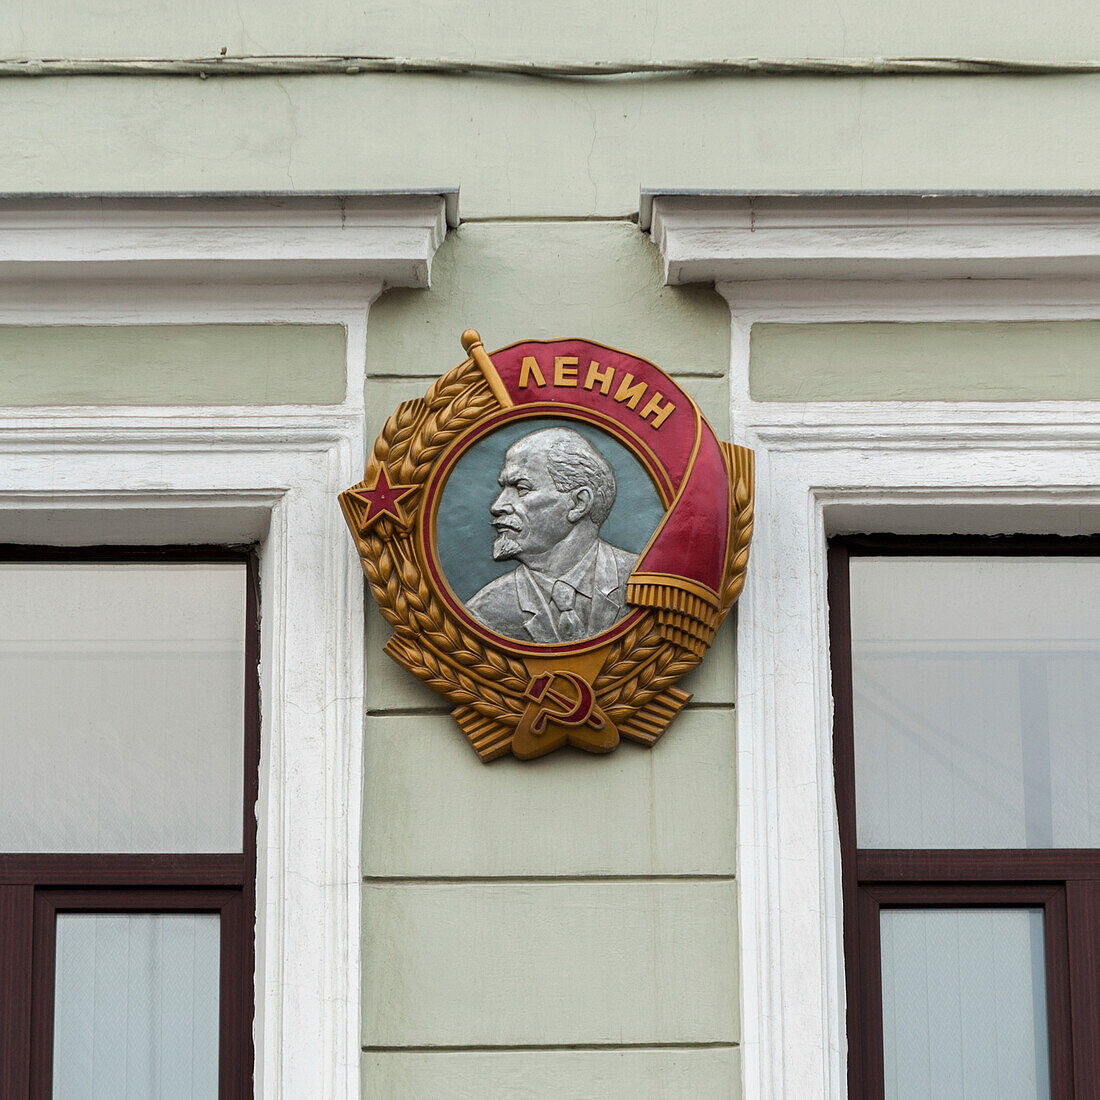 Picture Of A Leader Mounted On A Building; St. Petersburg Russia